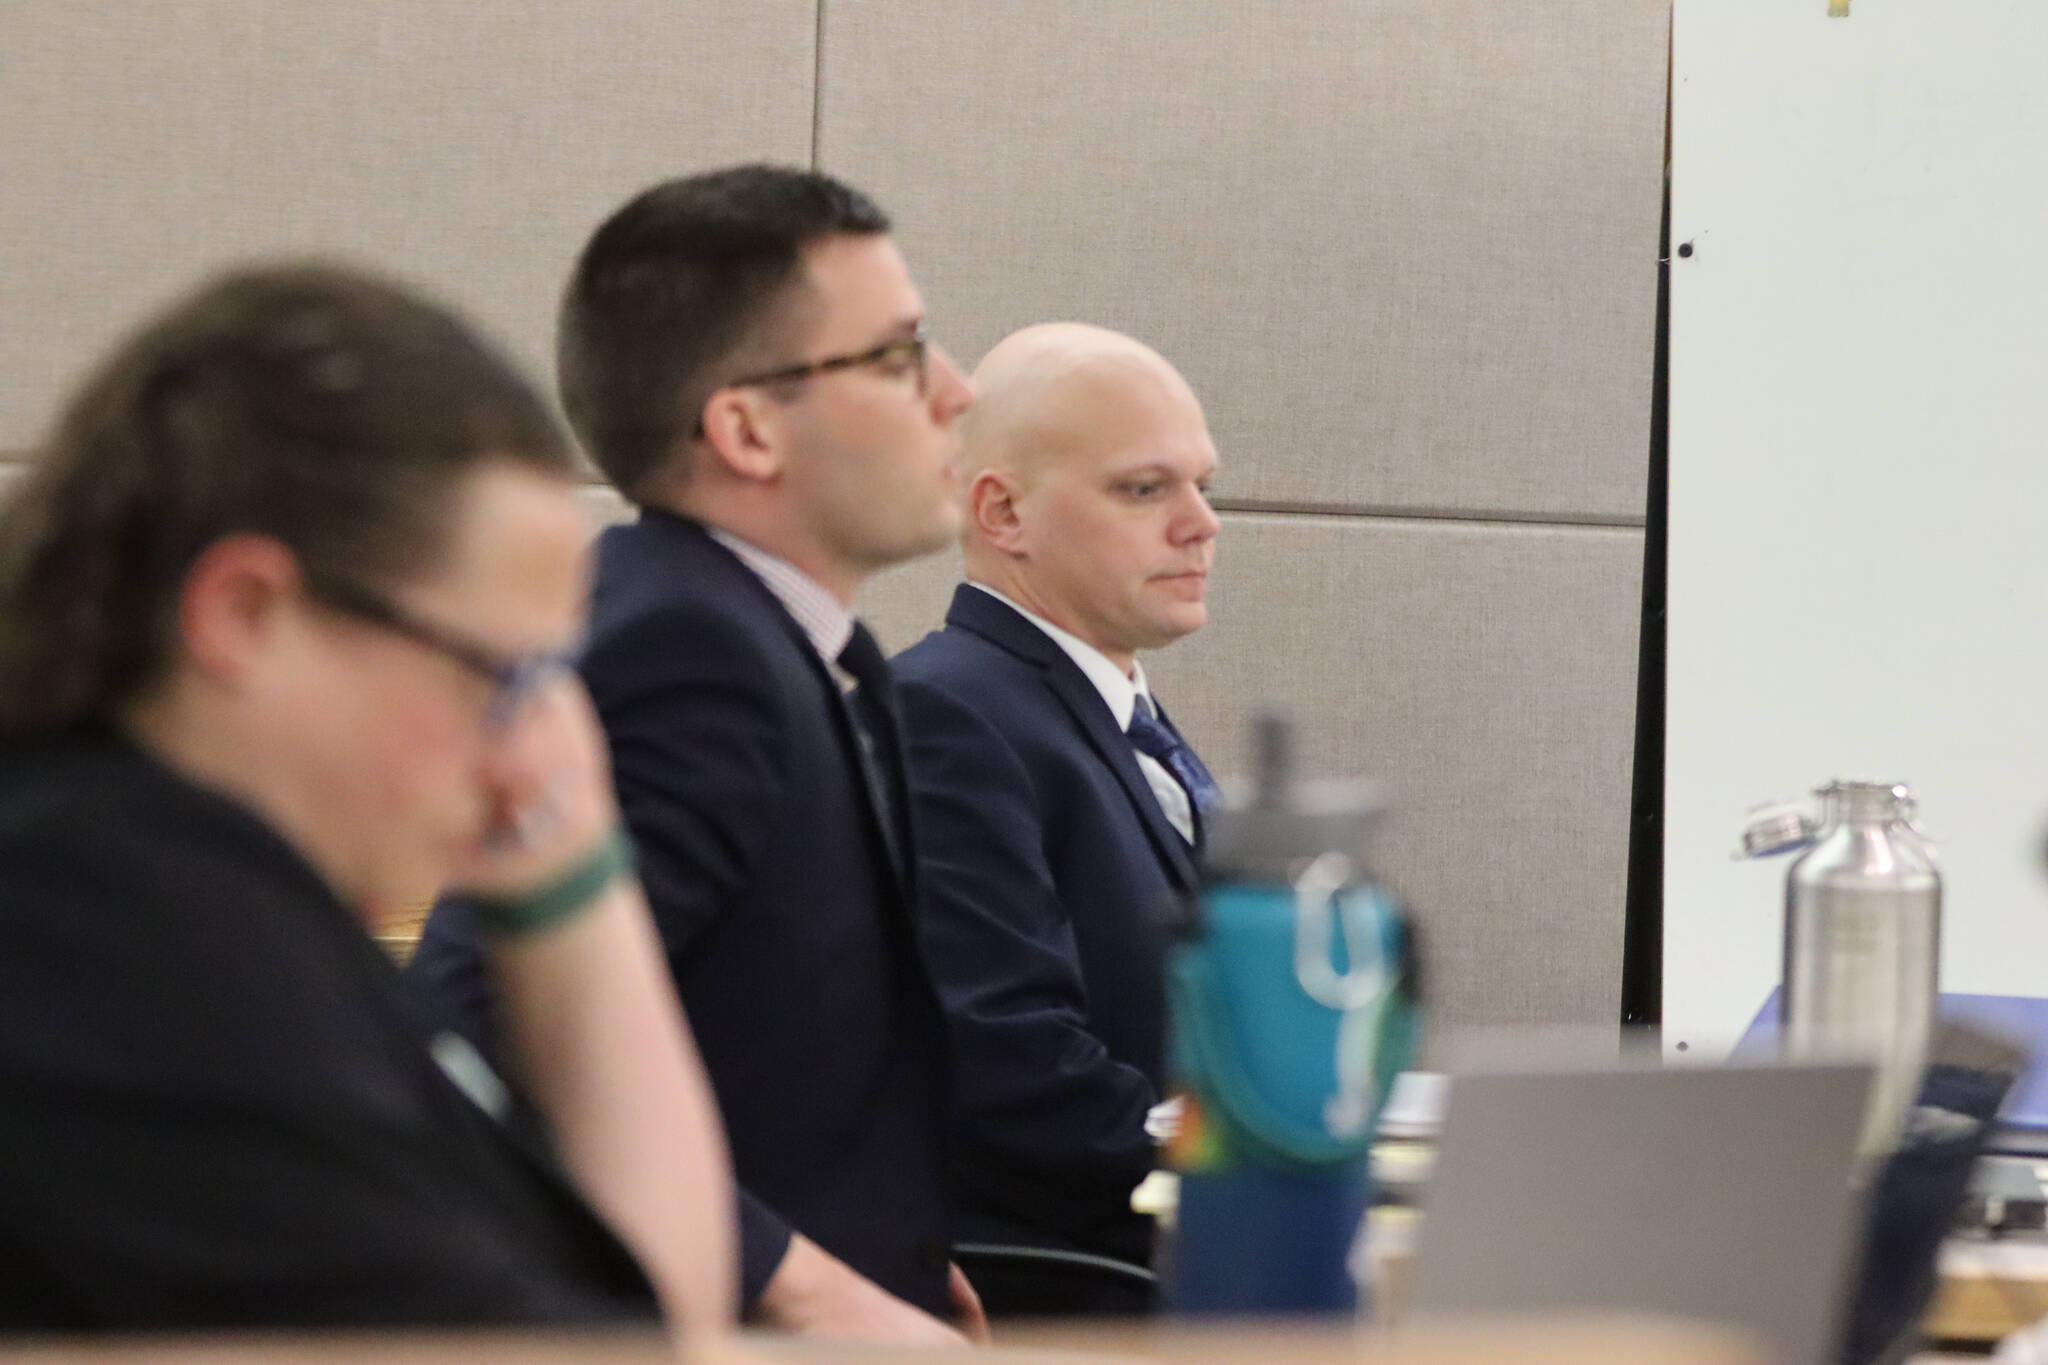 Jason Traver, sitting furtherest away, with defense attorney Nicholas Ambrose and state prosecuting attorney Jessalyn Gillum, awaits the jury’s verdict on Friday after a week’s long trial concluded. For a case that initially had started in 2019, Traver was ultimately found not guilty of second-degree assault.